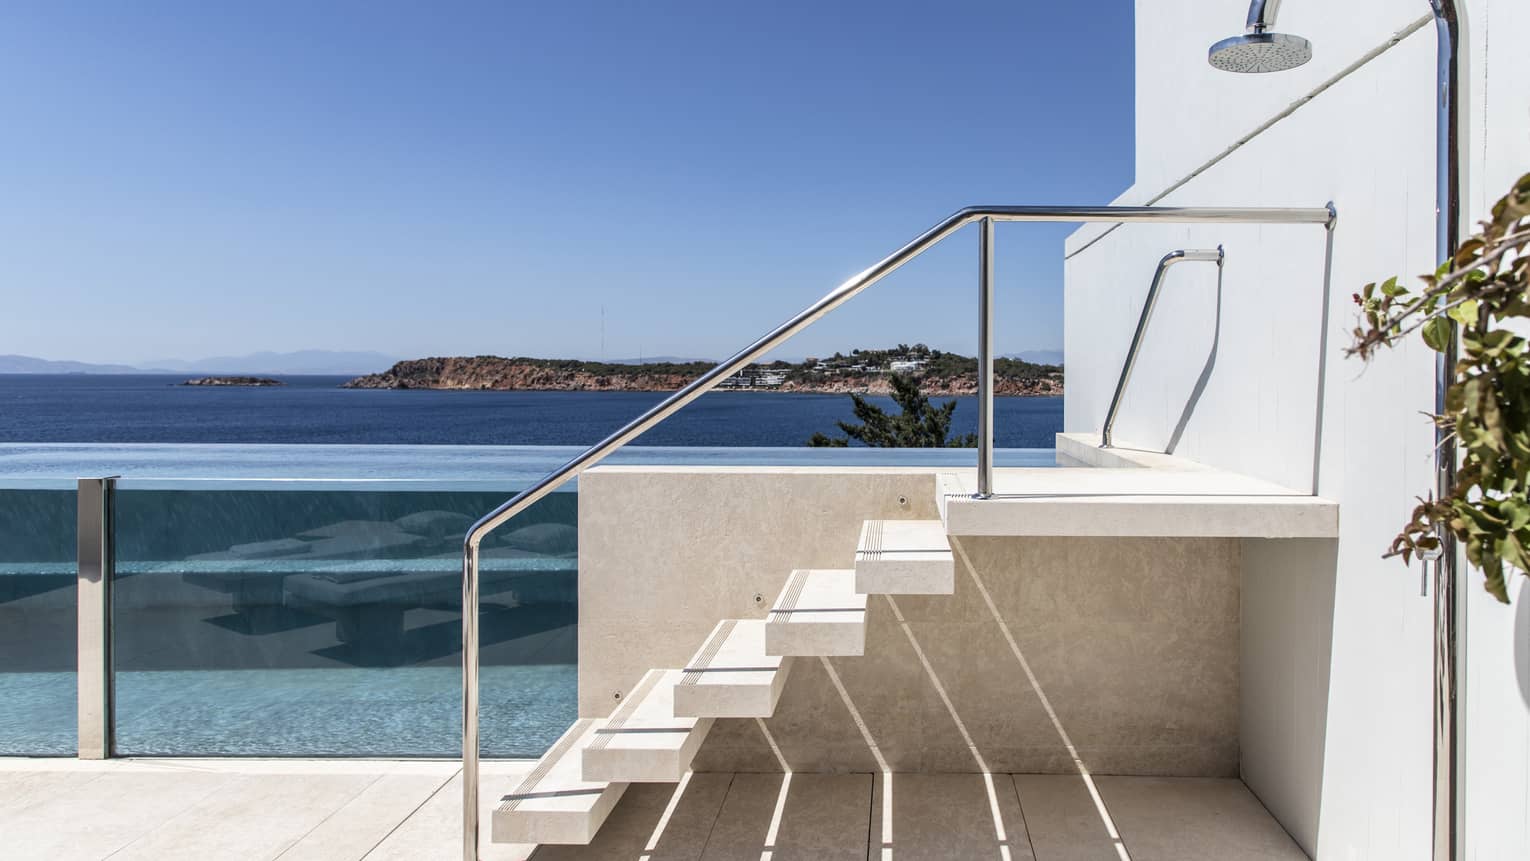 Six stairs lead to entrance of a raised, glass-enclosed pool on private patio with sea view